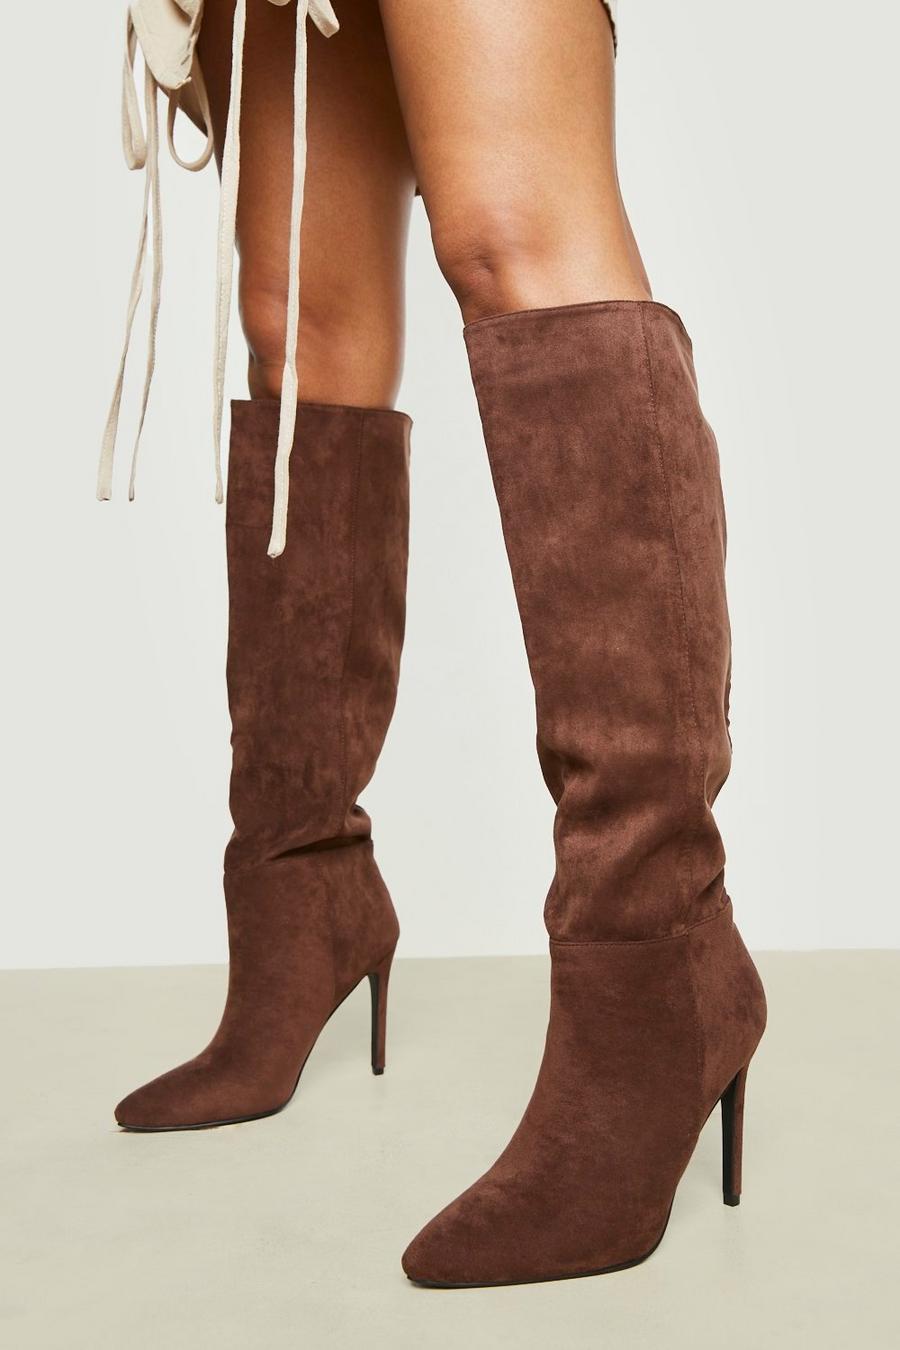 Chocolate brown Pointed Knee High Stiletto Heeled Boots